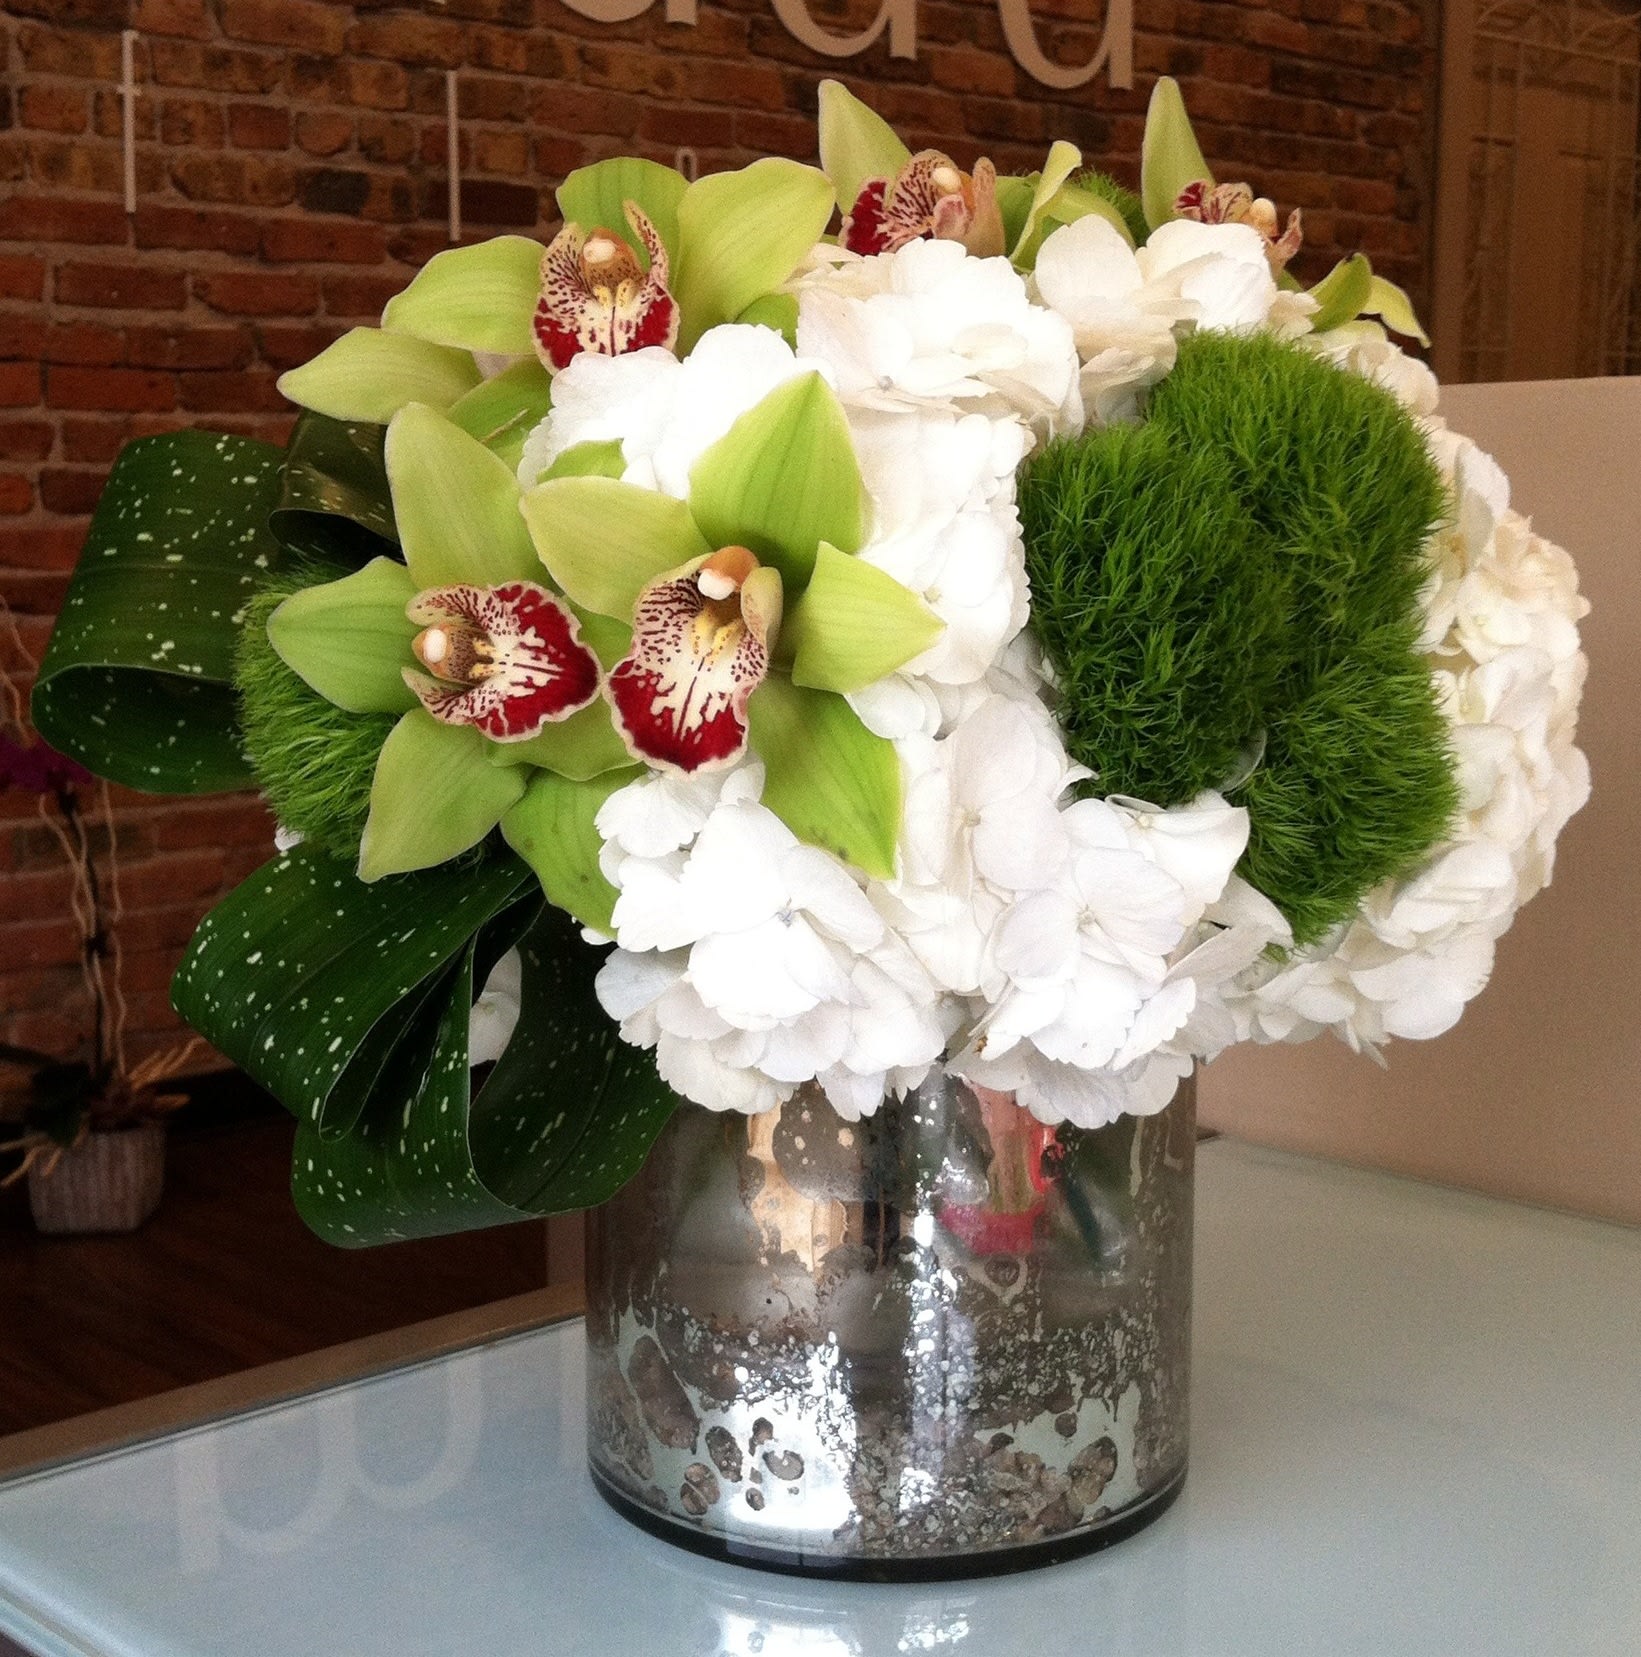 Elegant White and Green &quot;Best of Market&quot; - A designers choice arrangement of white and green flowers that will vary based on market availability in a silver mercury cylinder vase. Arrangement will not be as pictured but in the same style. Pictured is a lush bed of white hydrangea with green cymbidium orchids and dianthus accented by rolled foliage all sitting in a 6x6&quot; silver mercury cylinder.